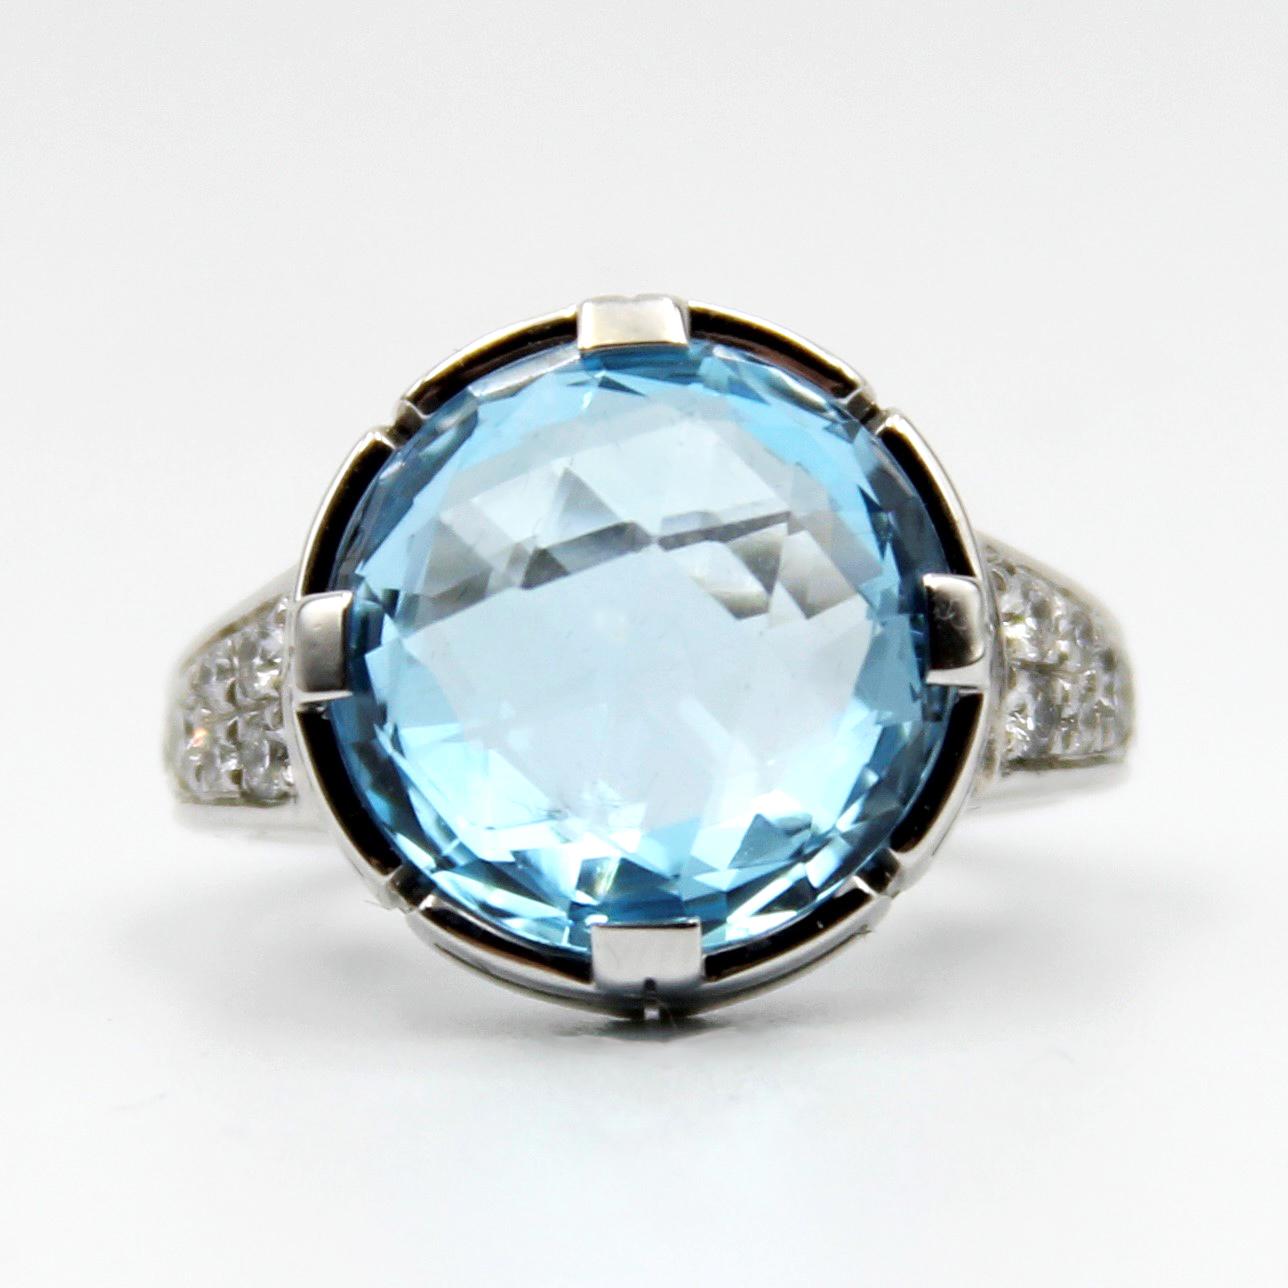 2000's Charming Bulgari Parentesi Cocktail topaz ring in 18k white gold set with round total 0.27 ct pavé diamonds.
Center Blue Topaz 13mm round - approx. : 11ct.
the ring measures a size 5/49 which can be resized.
